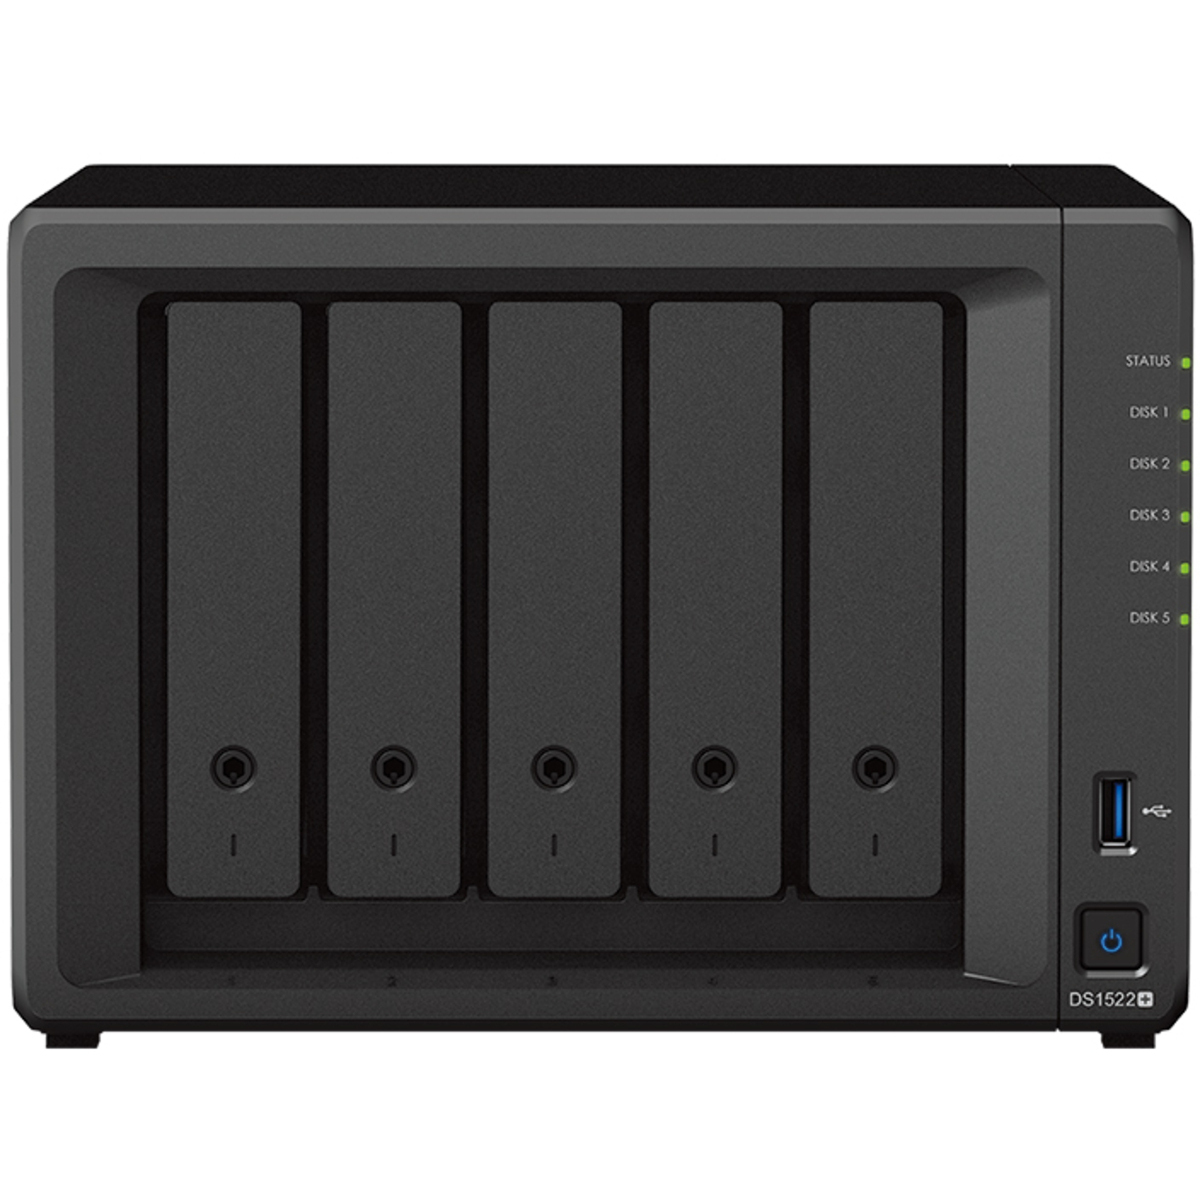 Synology DiskStation DS1522+ 60tb 5-Bay Desktop Multimedia / Power User / Business NAS - Network Attached Storage Device 5x12tb Seagate IronWolf Pro ST12000NT001 3.5 7200rpm SATA 6Gb/s HDD NAS Class Drives Installed - Burn-In Tested - ON SALE DiskStation DS1522+